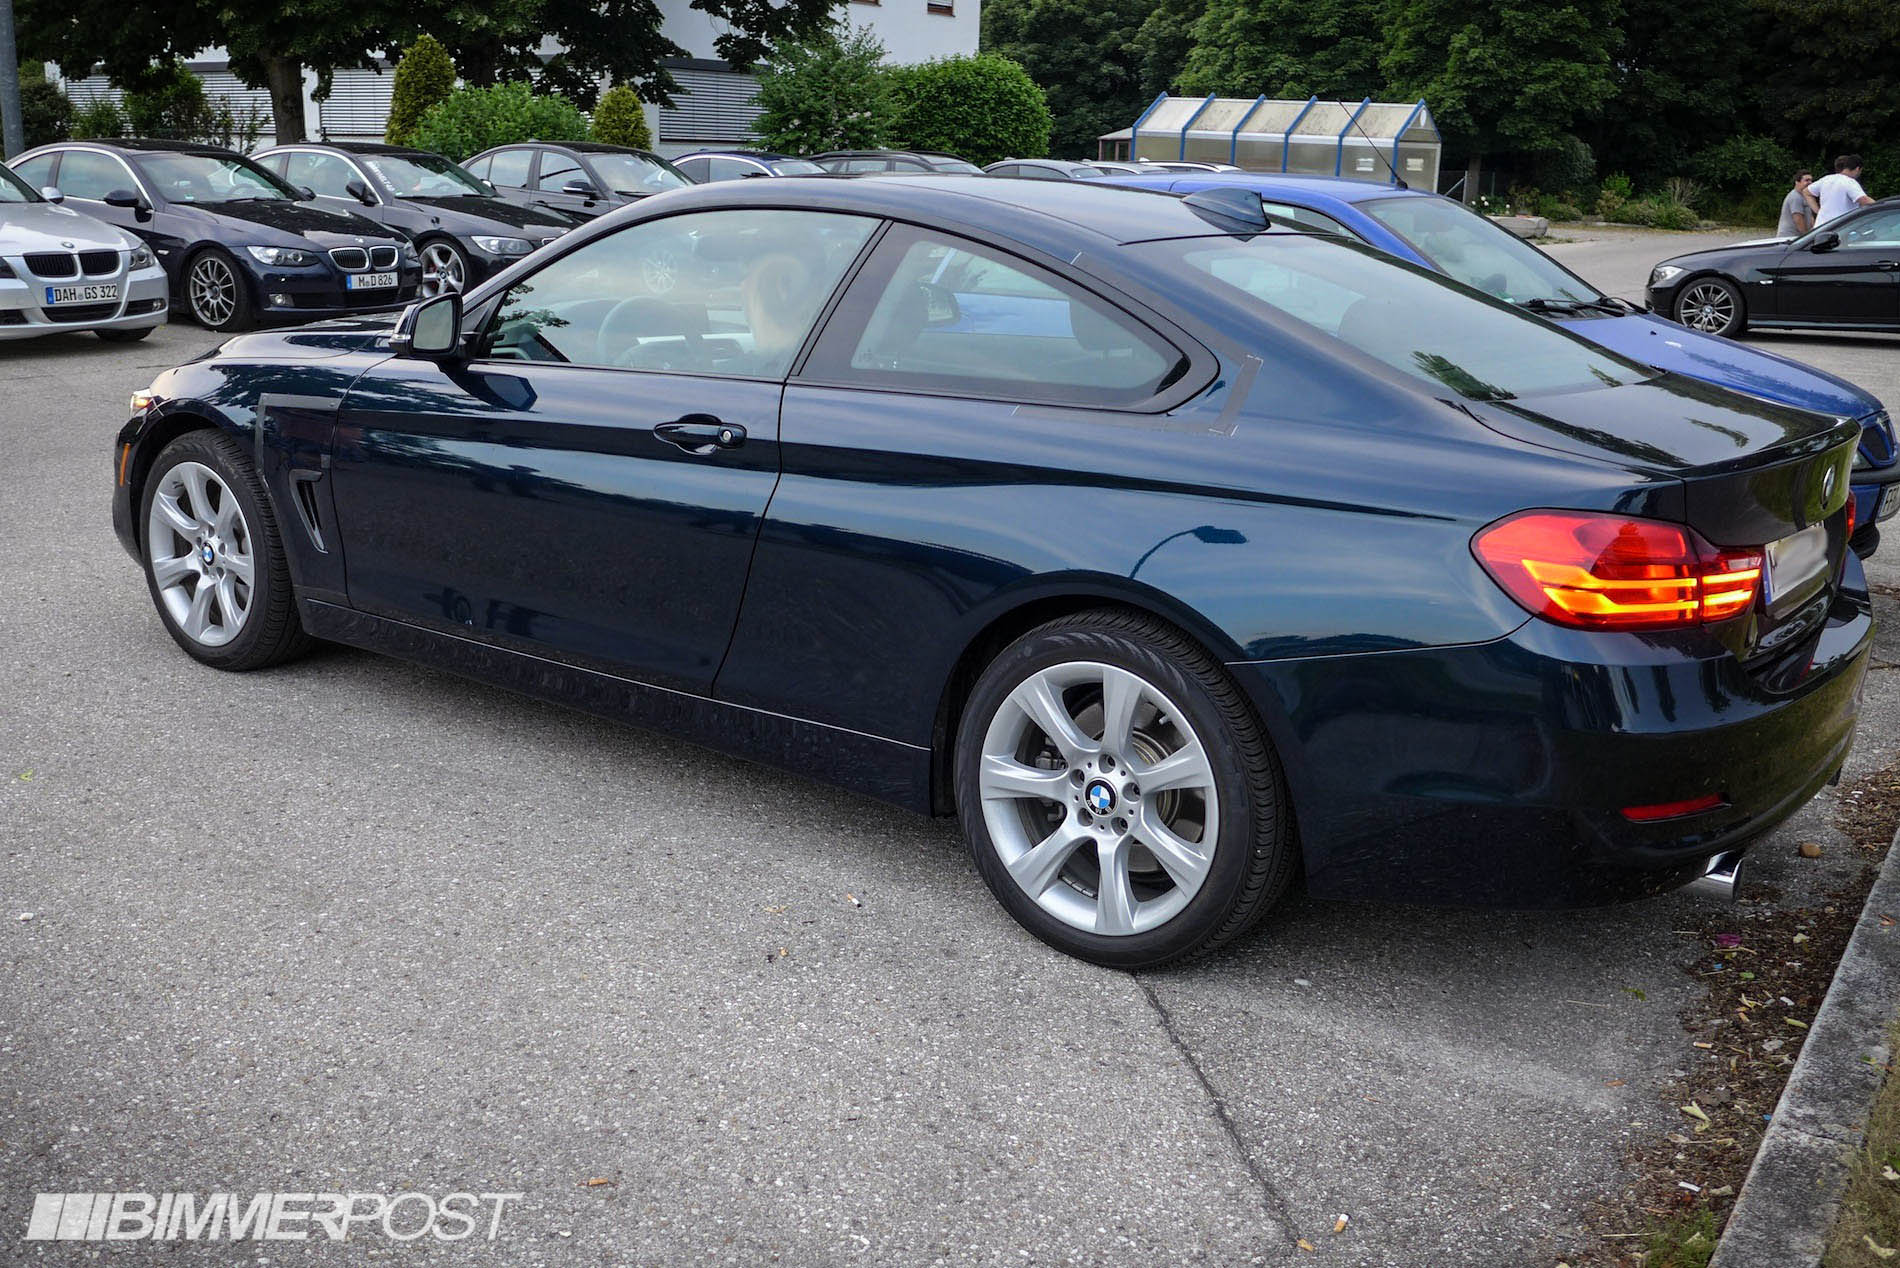 Midnight Blue F32 4 Series Coupe Caught in the Wild